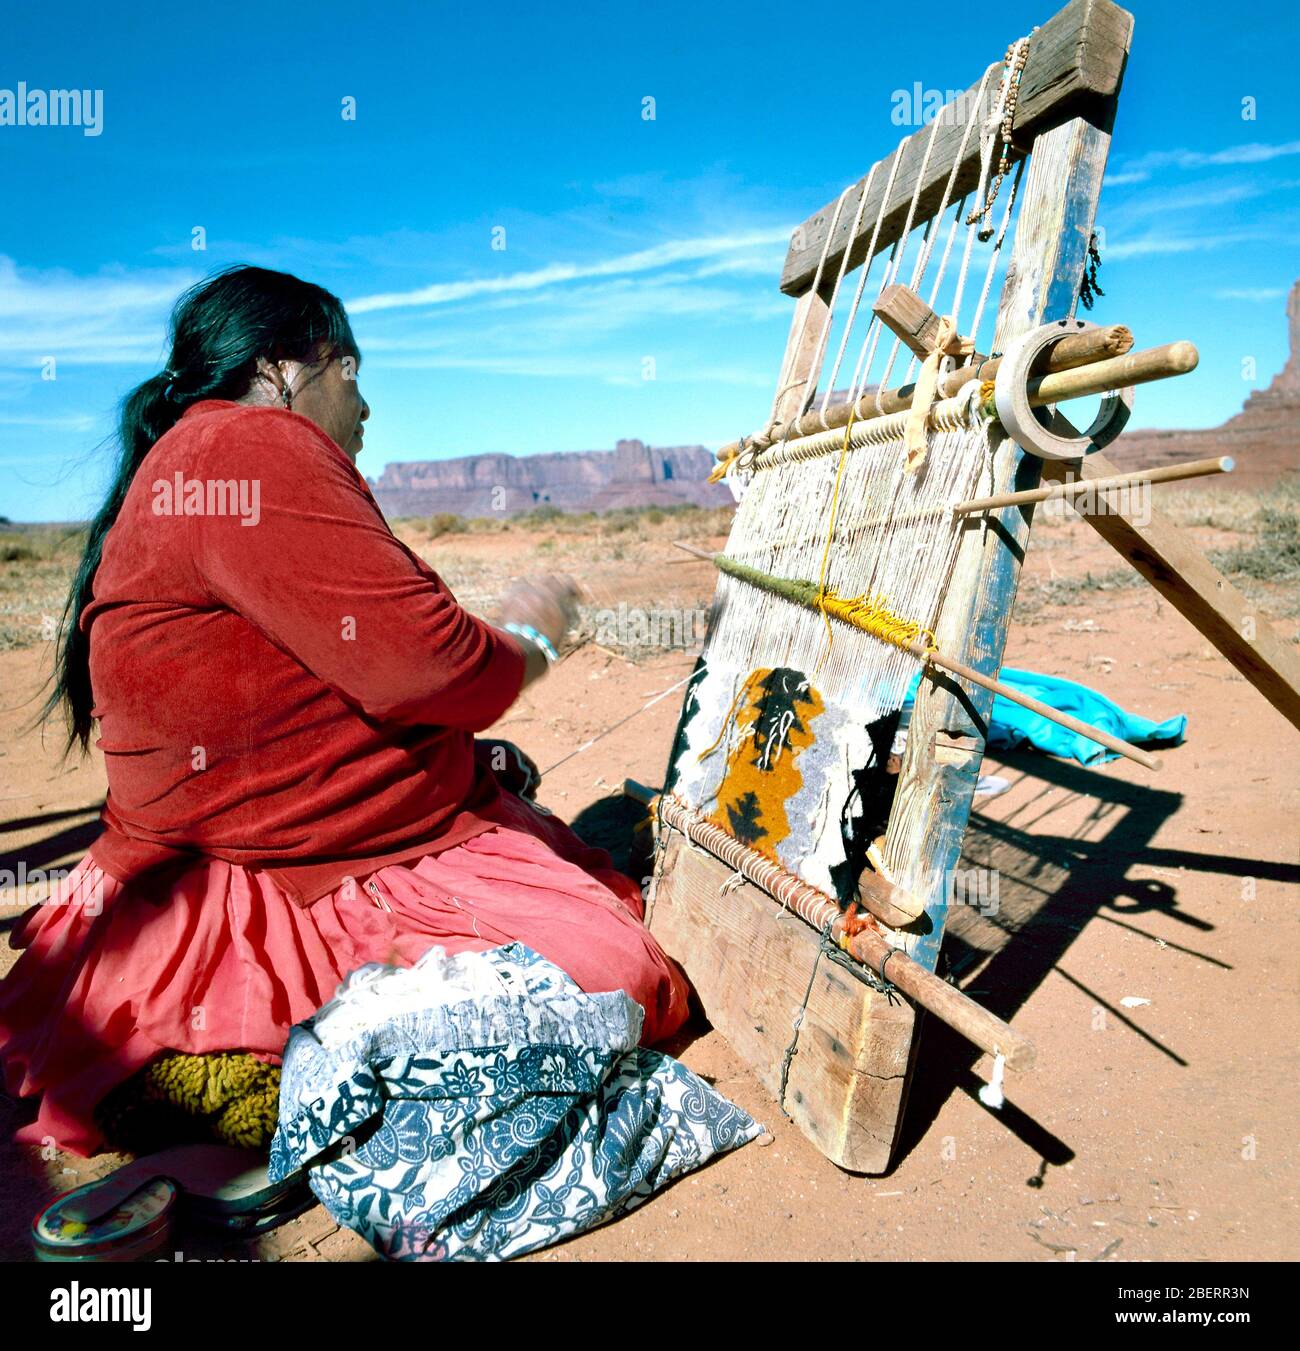 Monument Valley, U.S.A.-September 19,2001: Navajo Indian Woman Weaving Rug at Monument Valley, Utah, U.S.A. Stock Photo